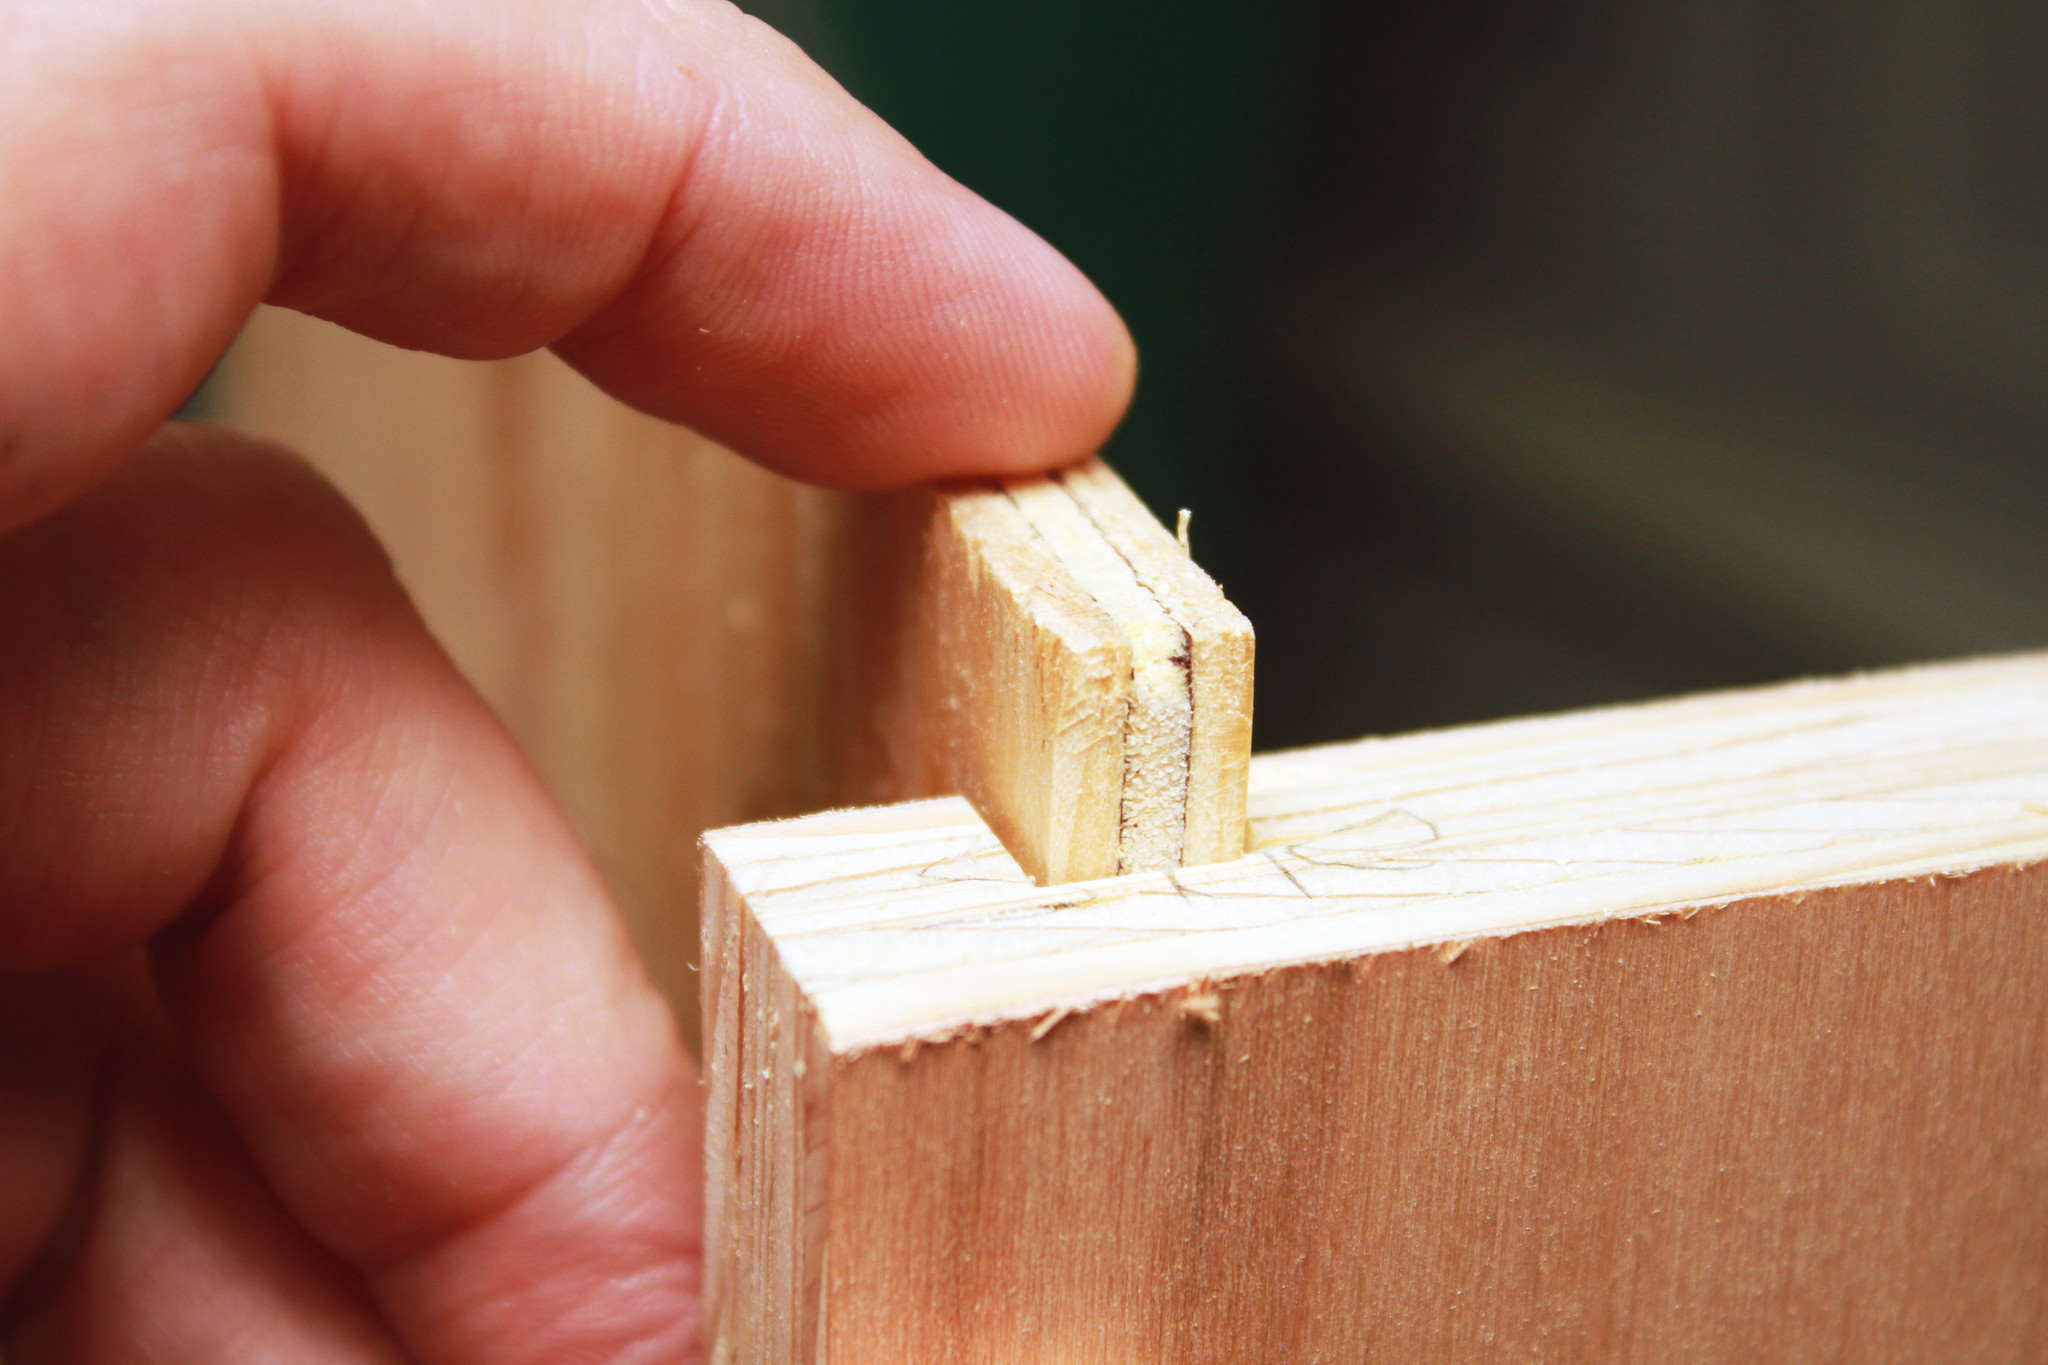 how to cut a notch in wood